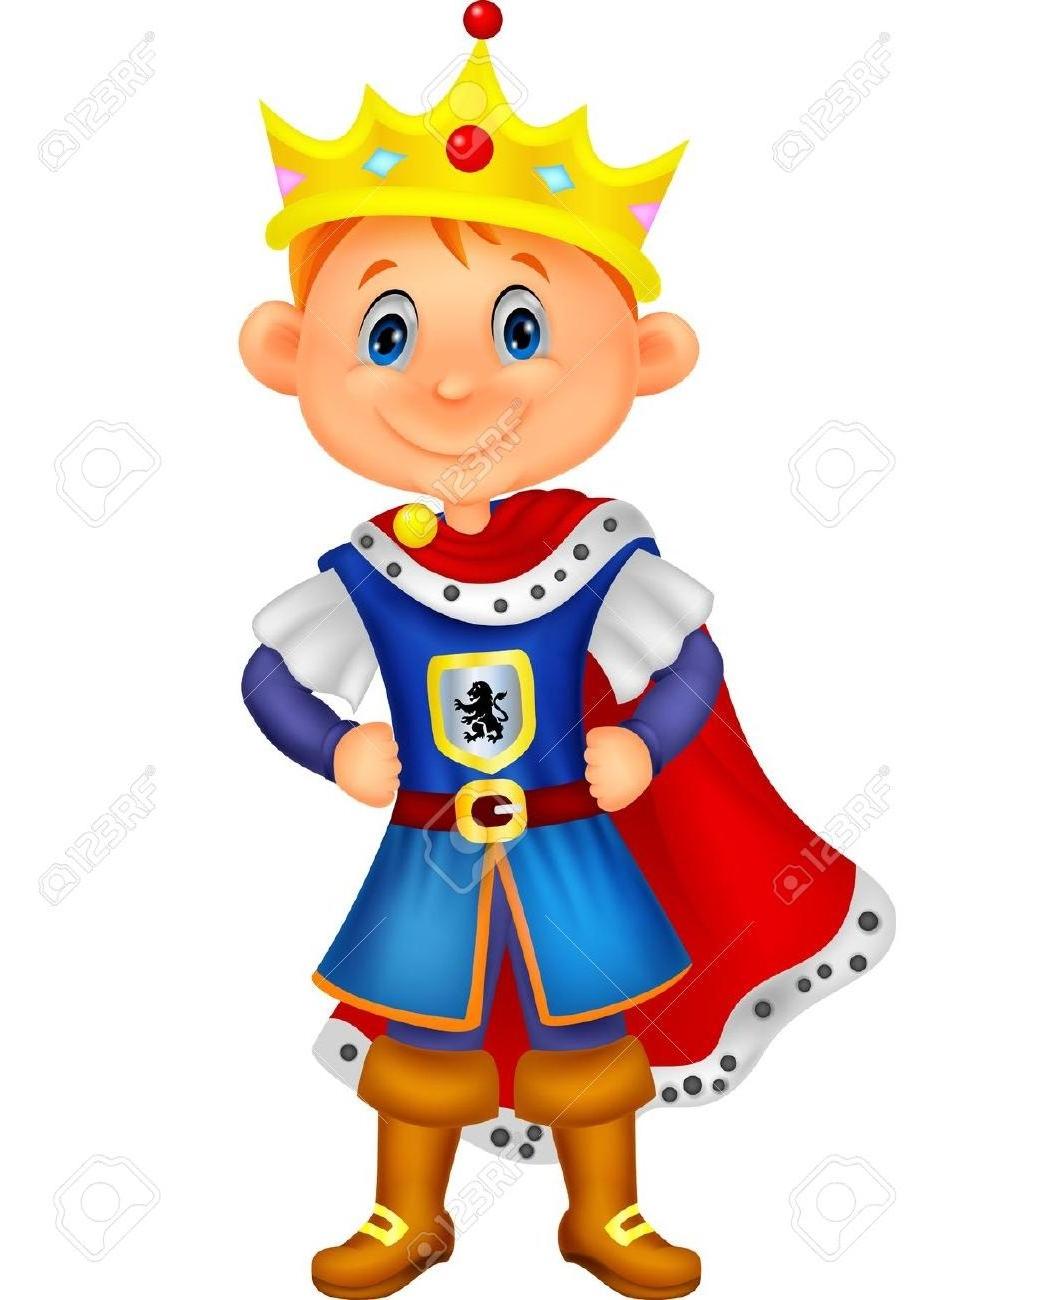 king clipart prince